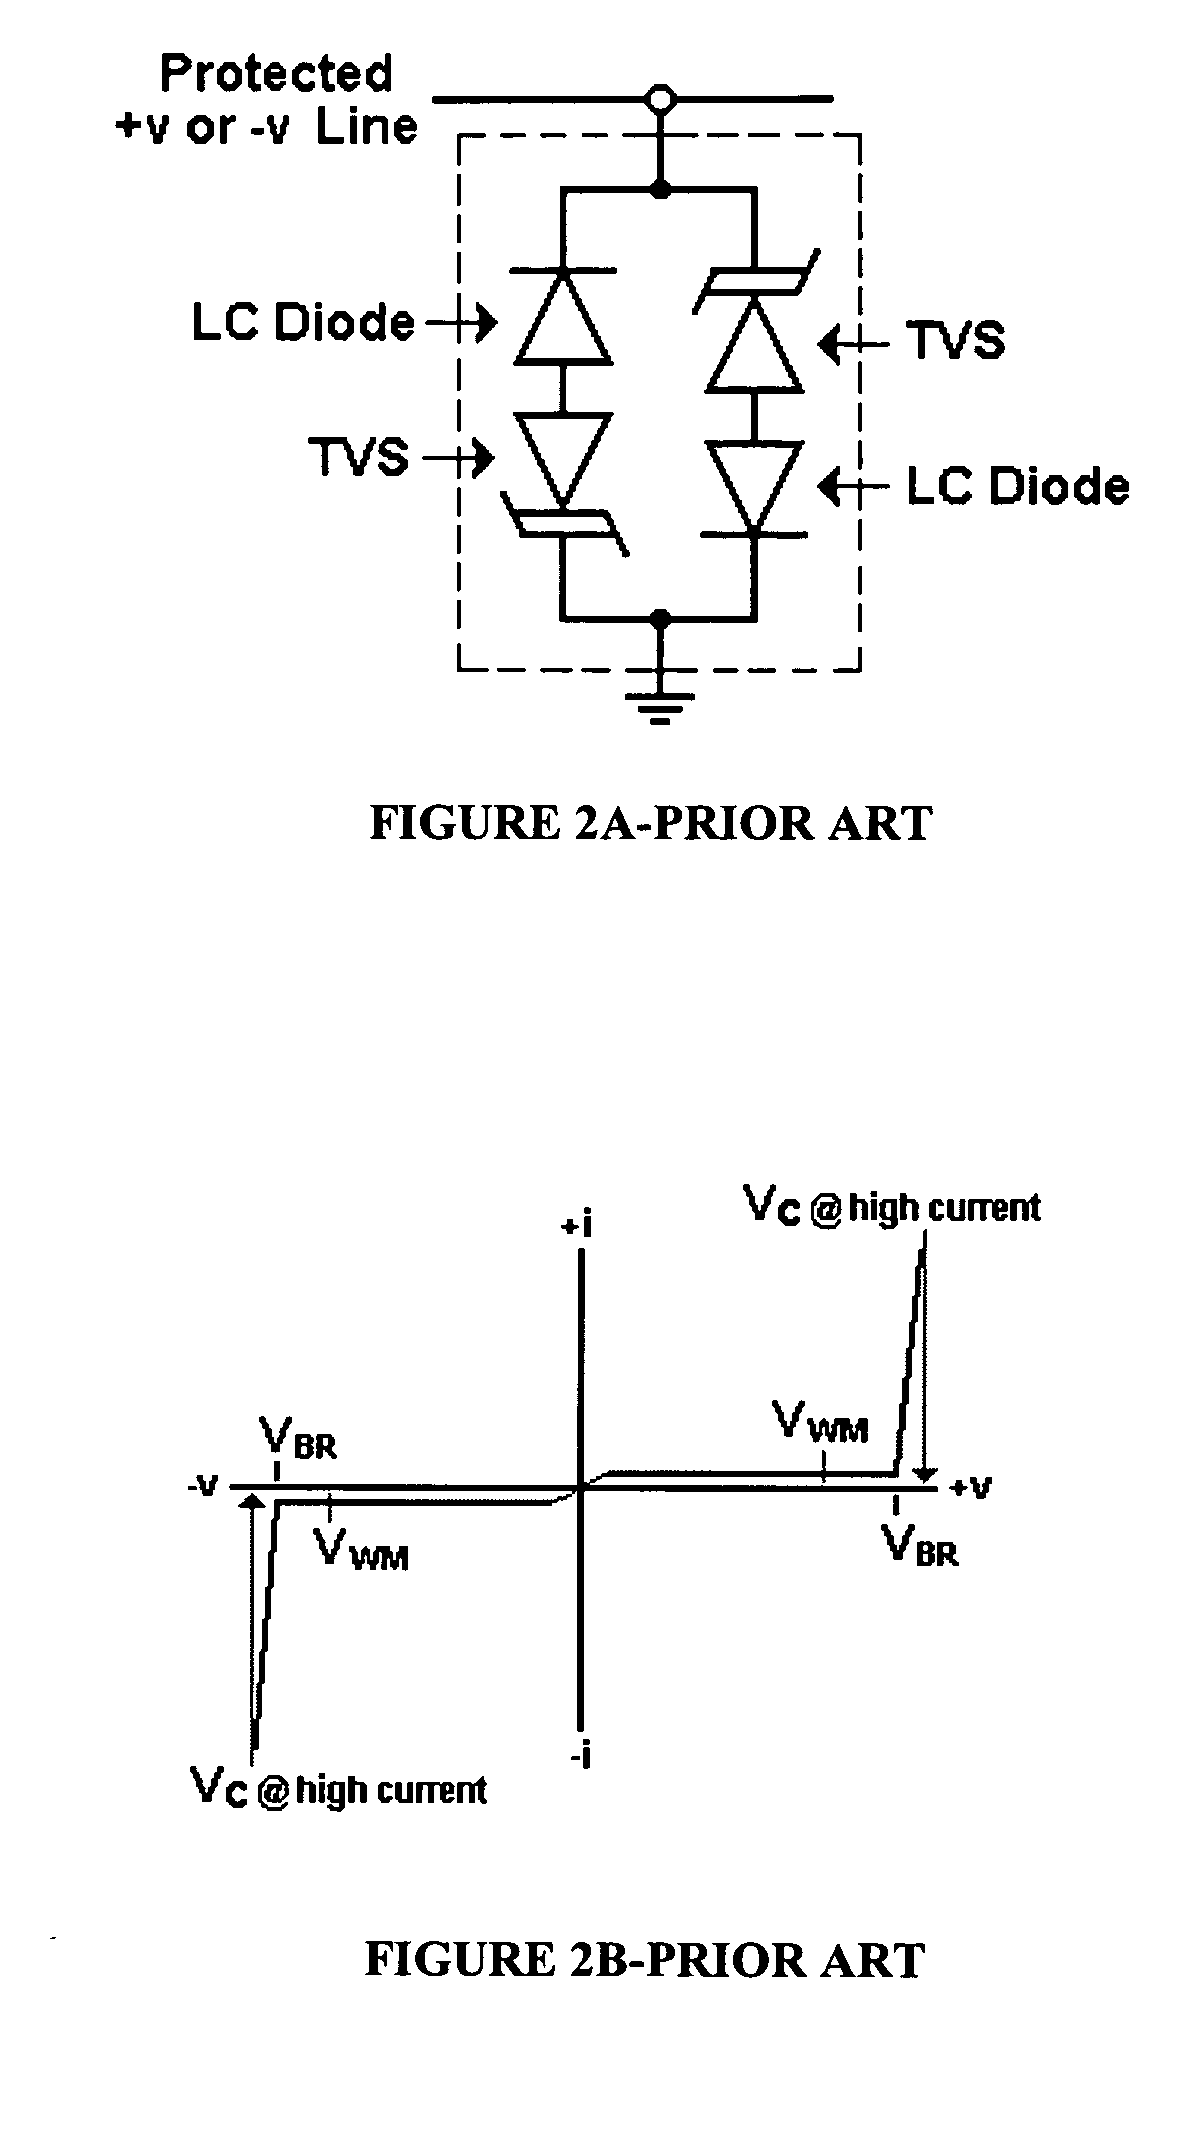 Device for protecting I/O lines using PIN or NIP conducting low capacitance transient voltage suppressors and steering diodes